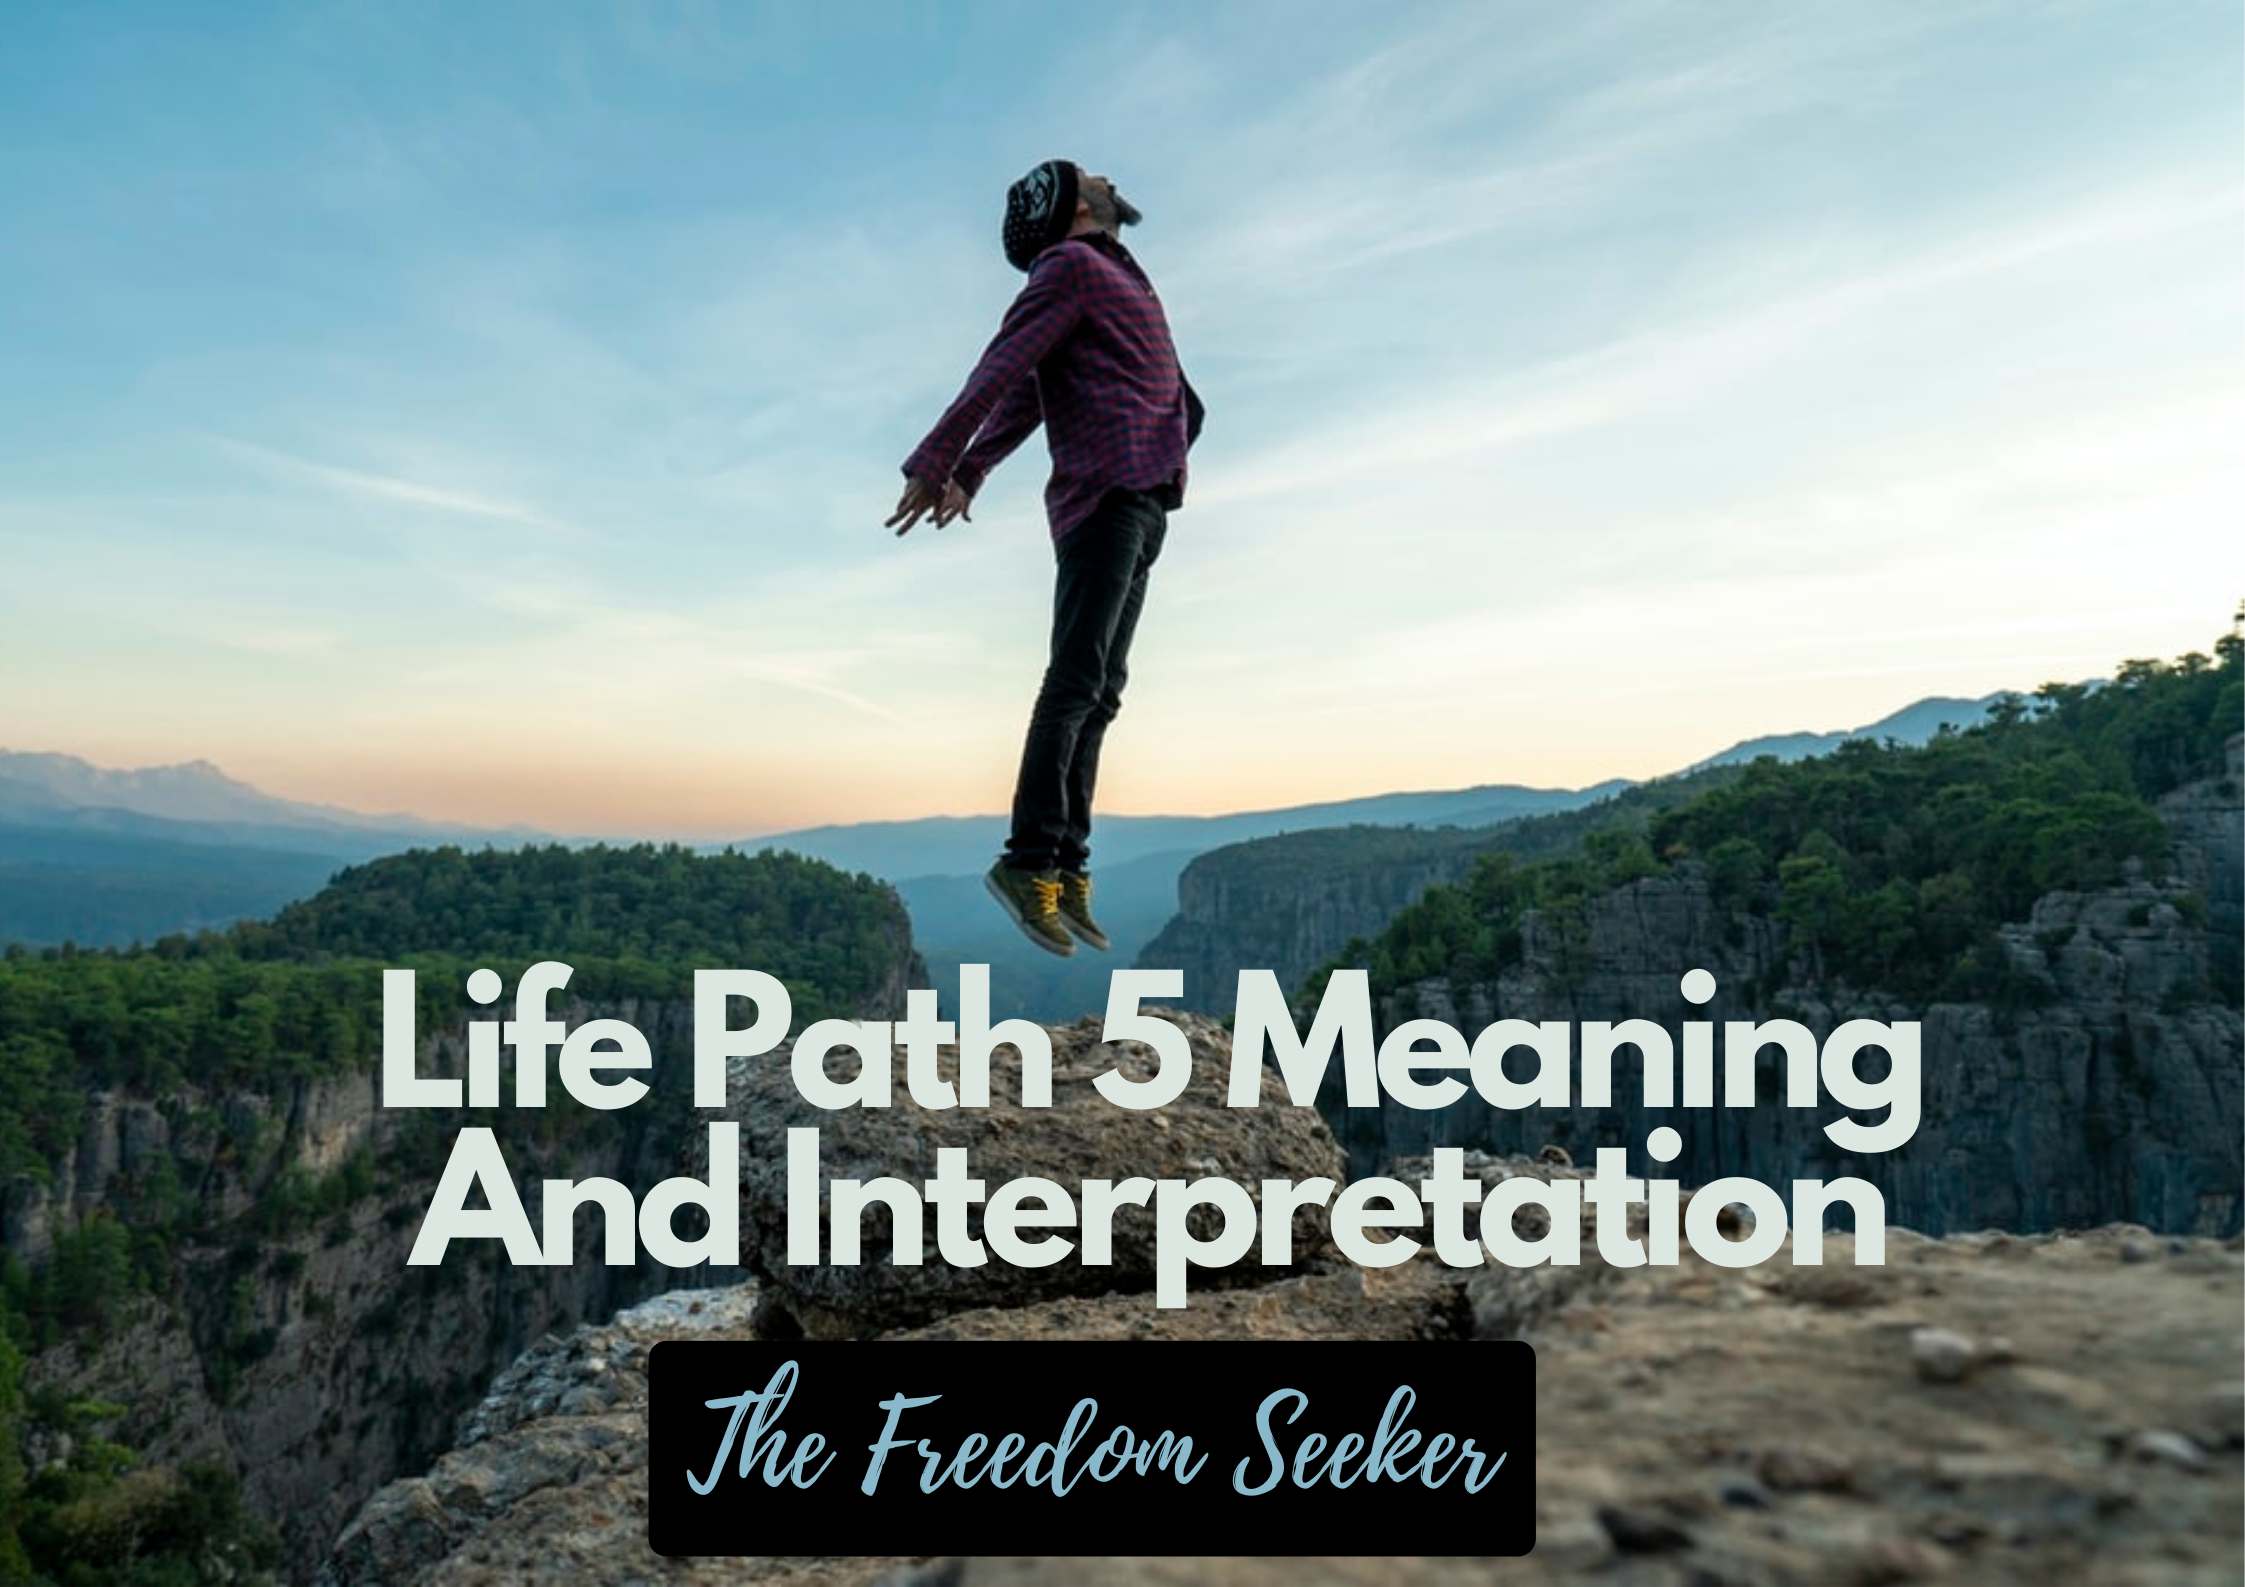 A man jumping at the mountain with words Life Path 5 Meaning And Interpretation freedom seeker